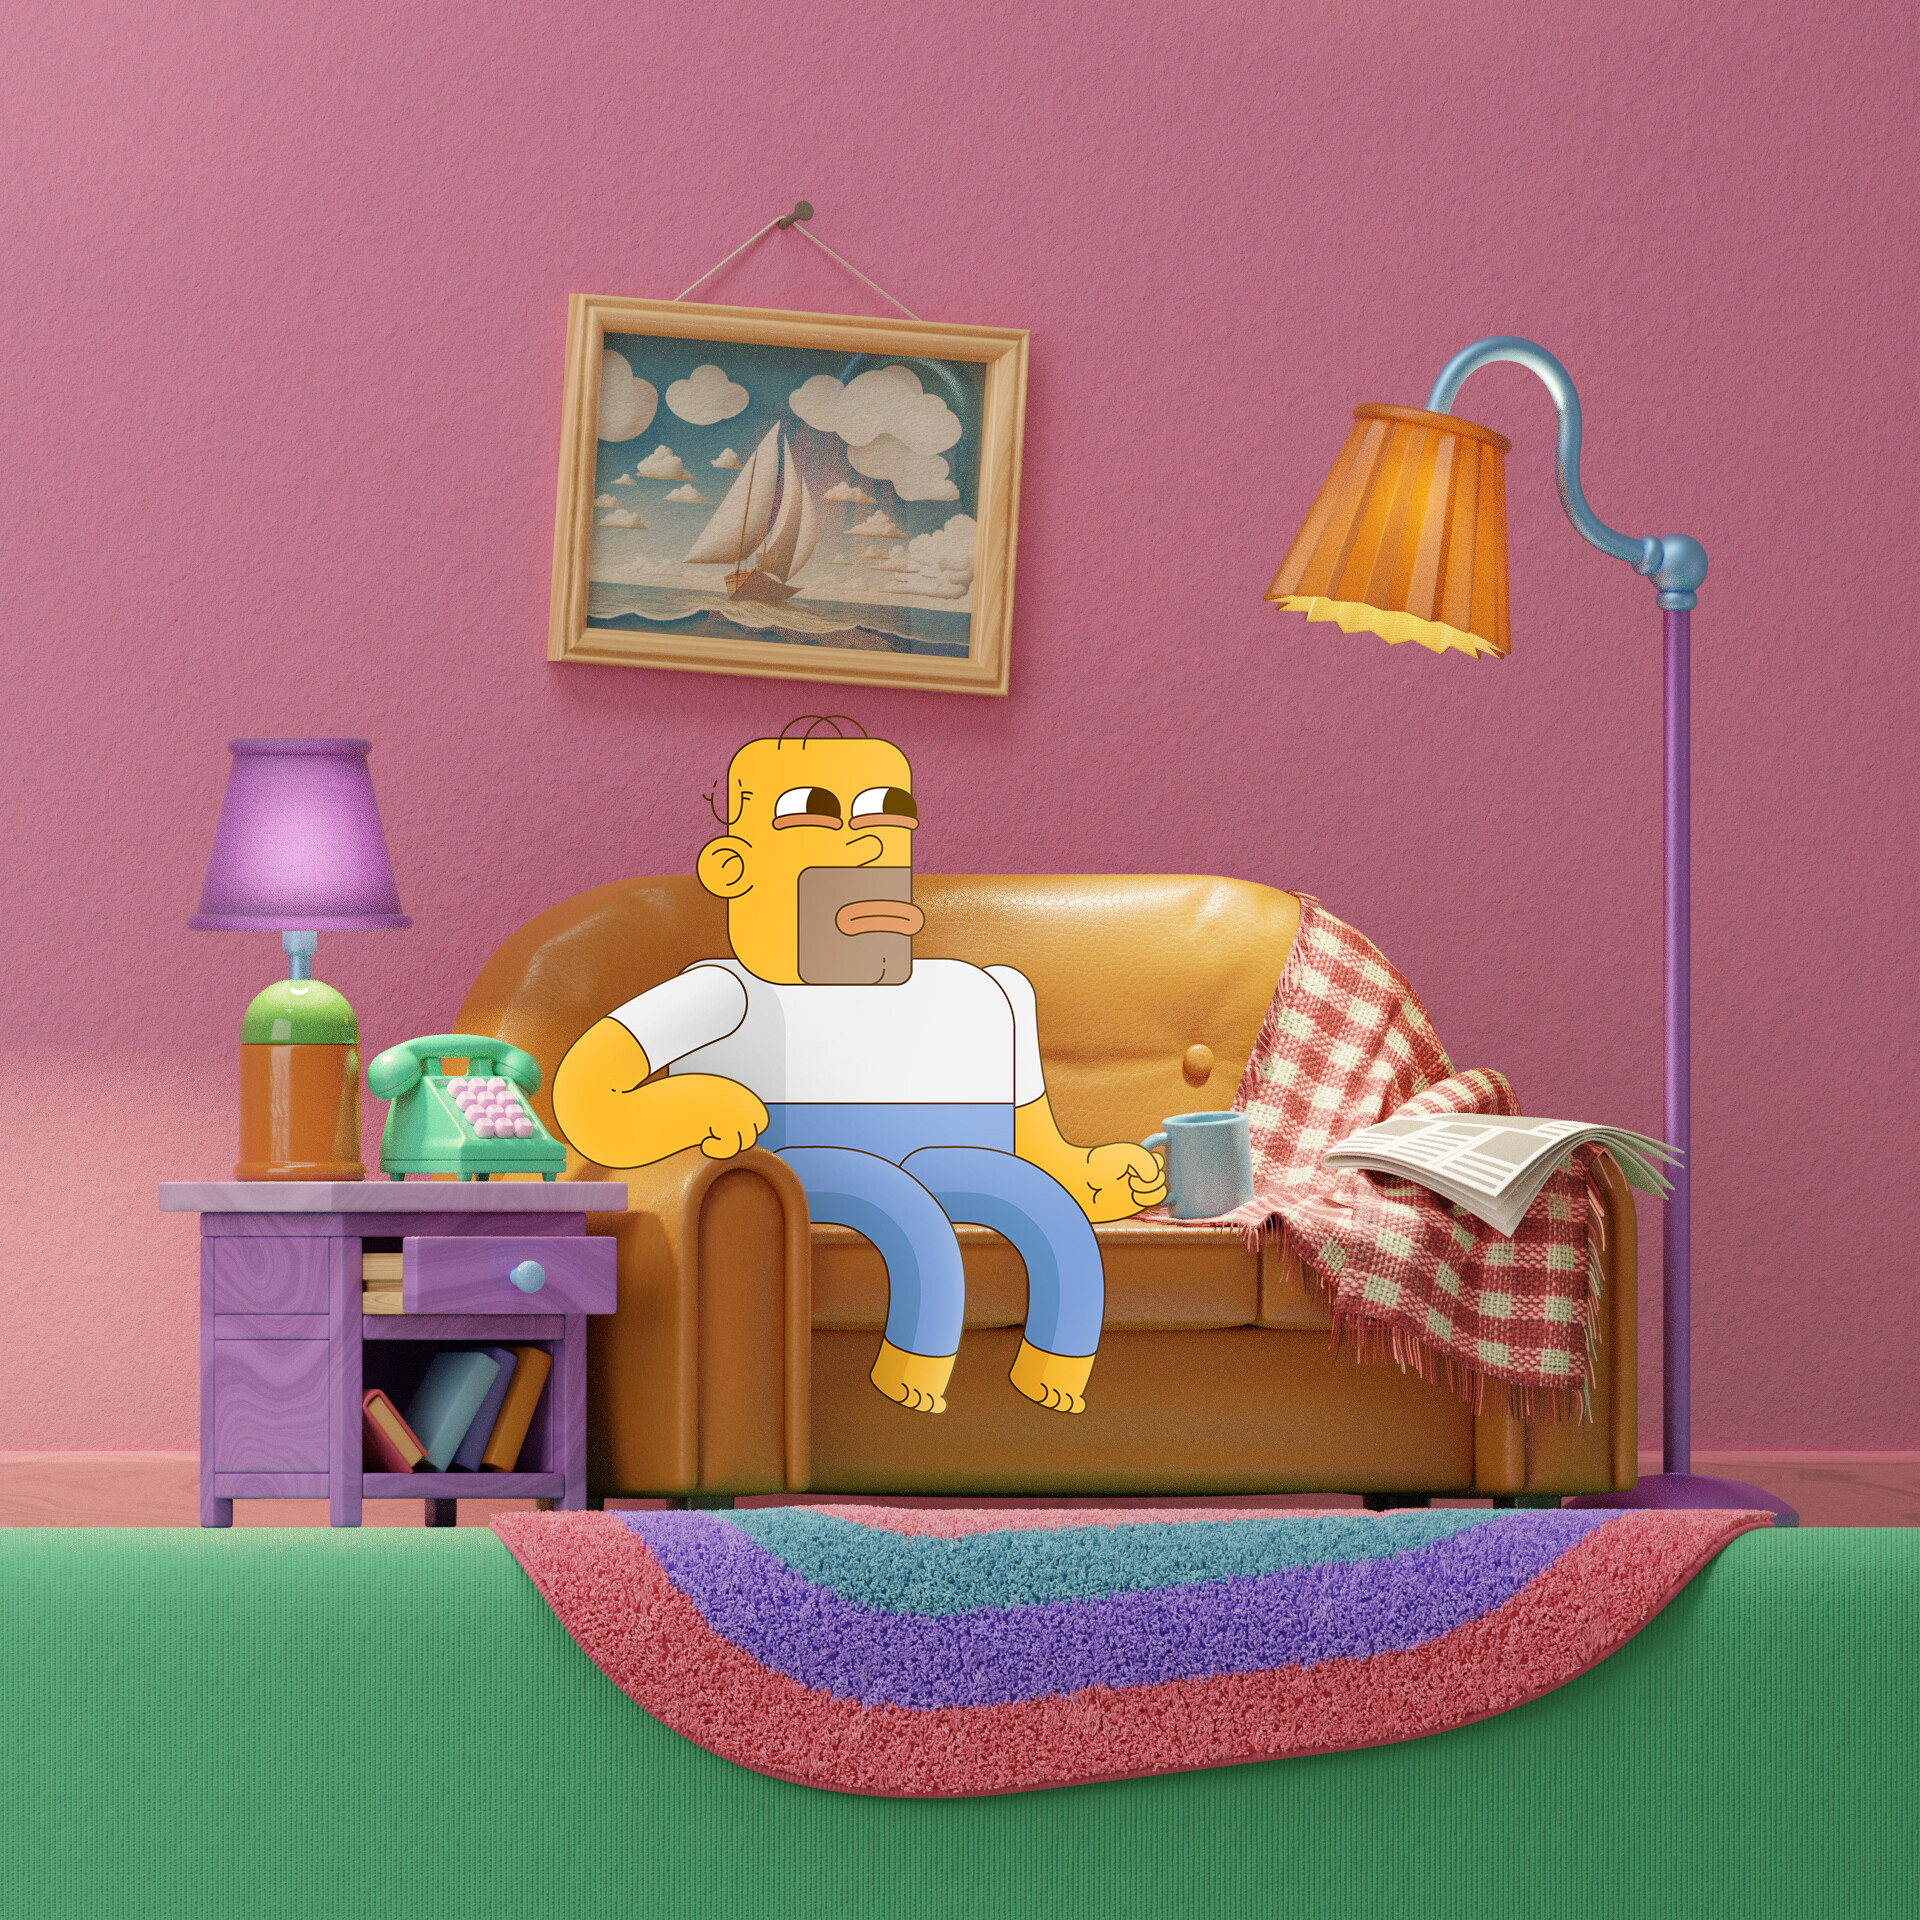 The Simpsons living room - Finished Projects - Blender Artists Community